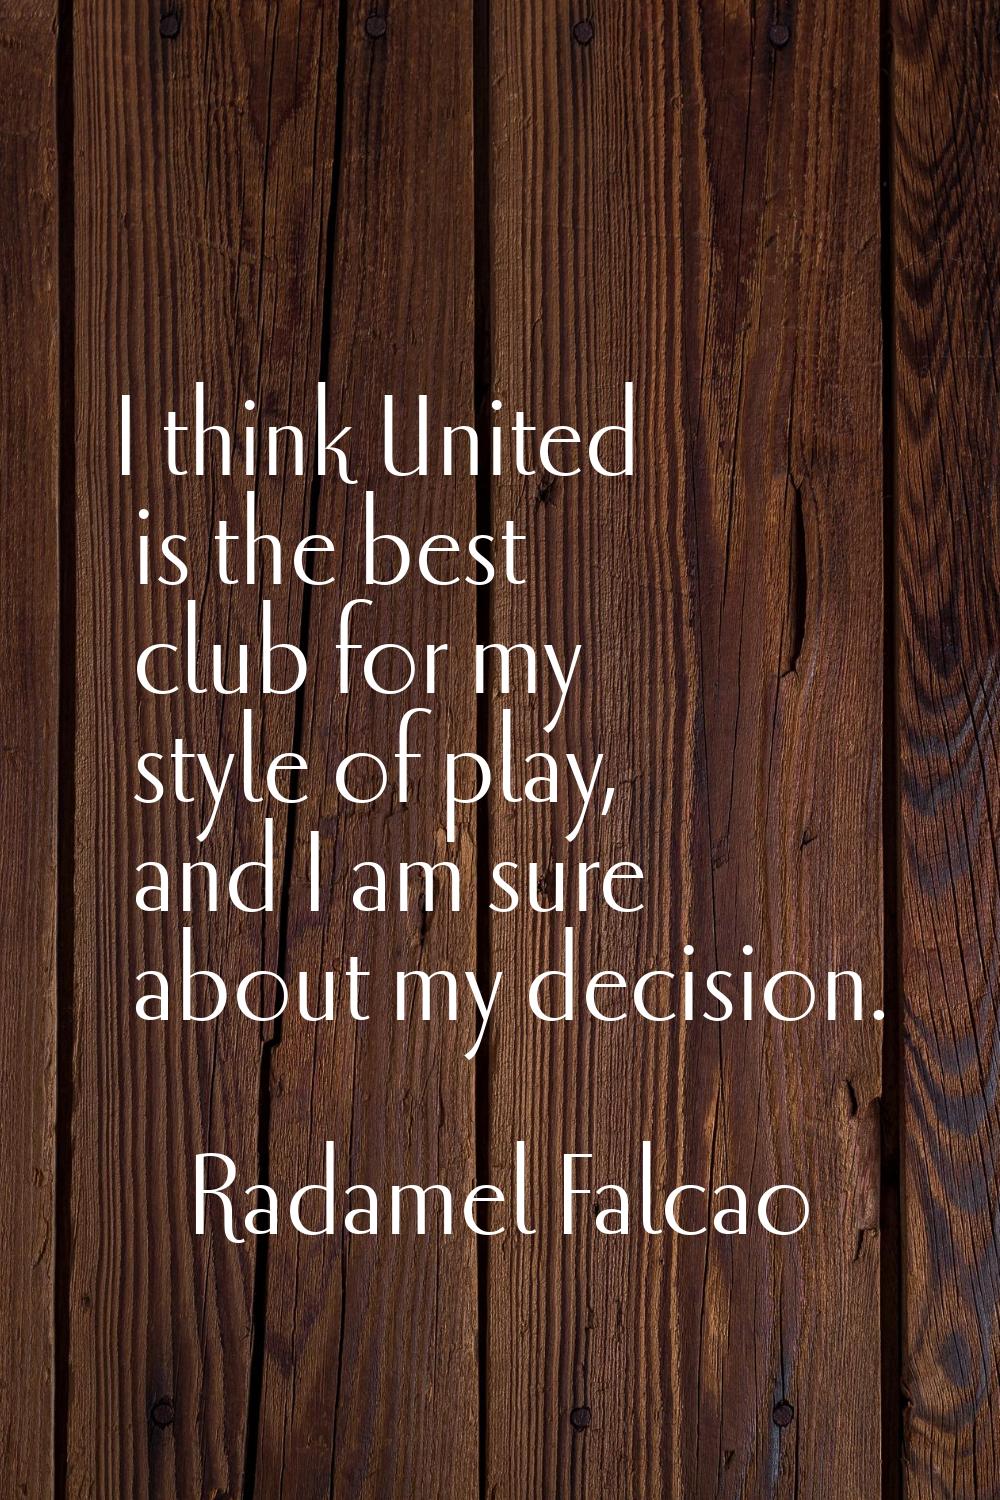 I think United is the best club for my style of play, and I am sure about my decision.